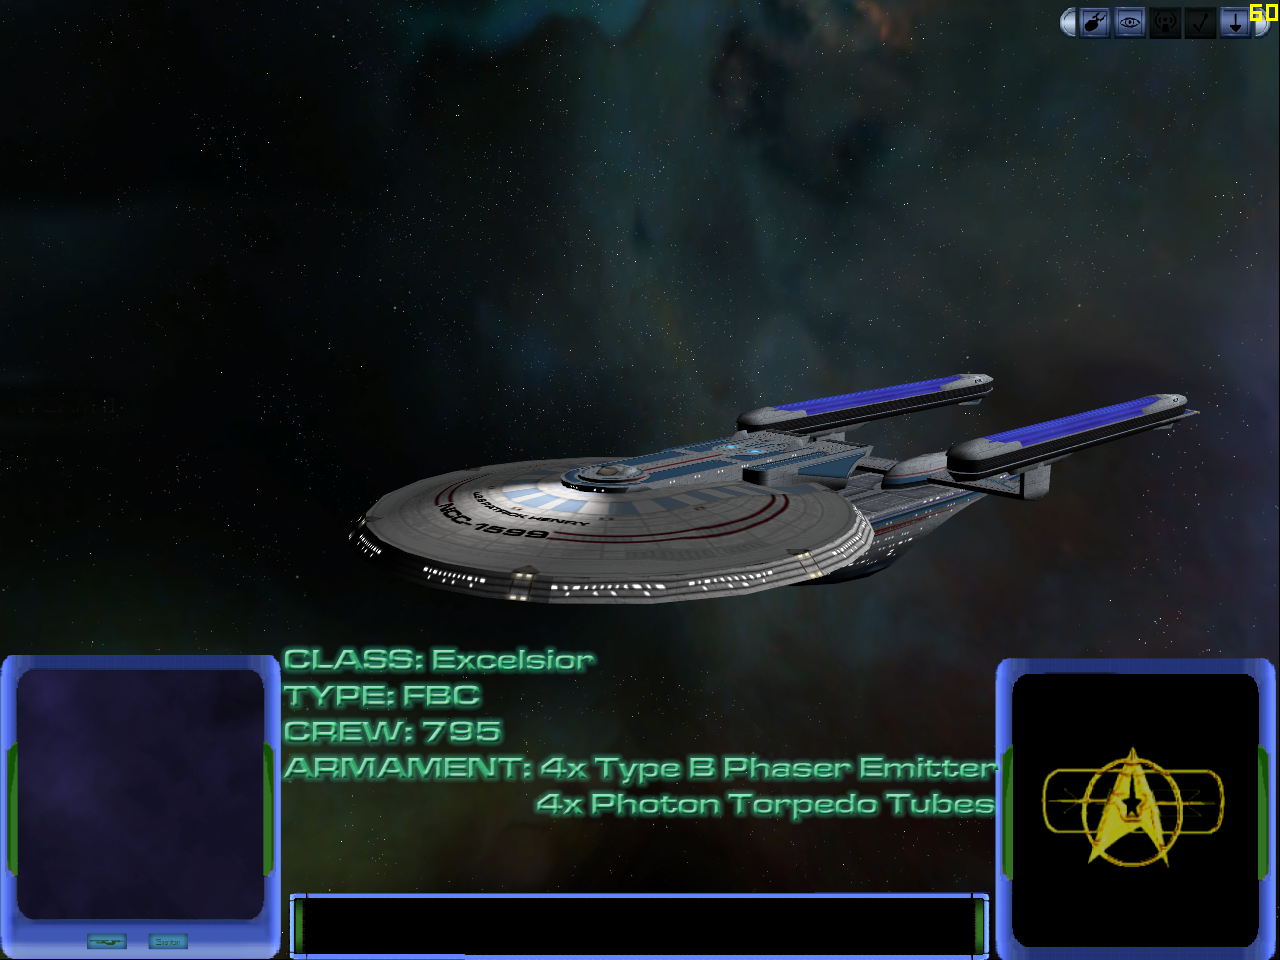 Excelsior Class Image Klingon Academy Ii Empire At War Mod For Star